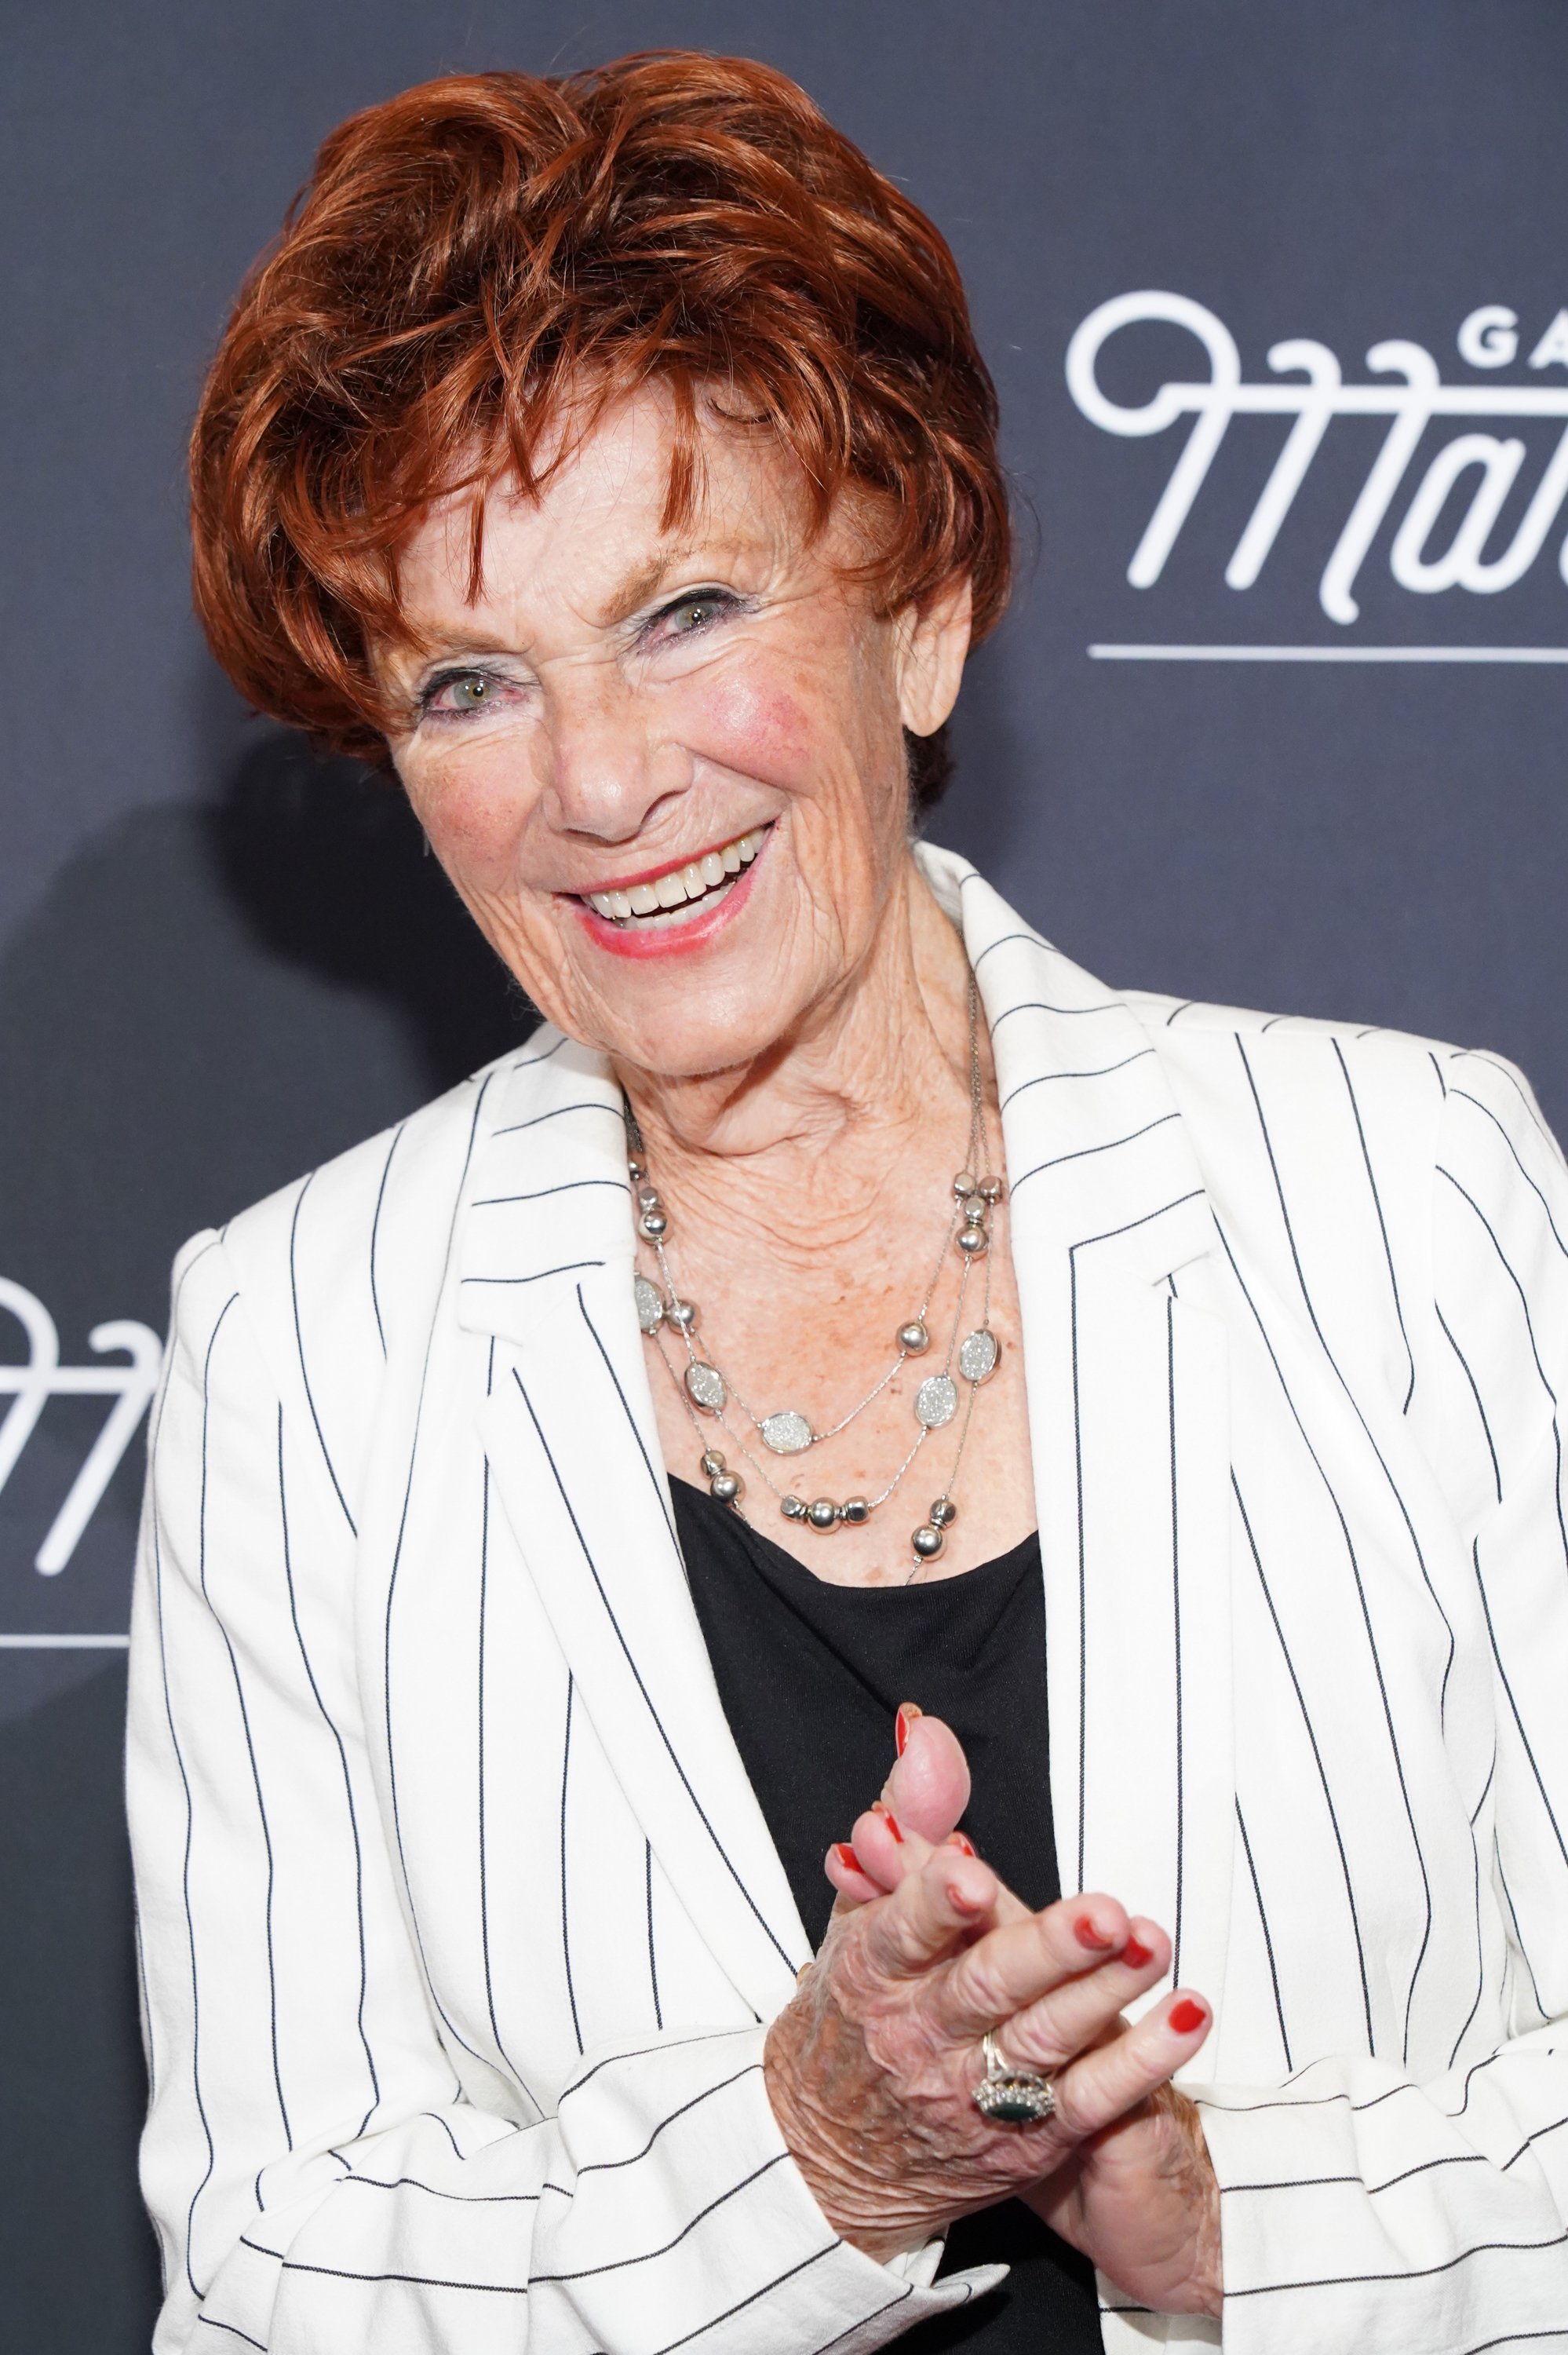 Marion Ross attends Garry Marshall Theatre's 3rd Annual Founder's Gala Honoring Original "Happy Days" Cast at The Jonathan Club on November 13, 2019 in Los Angeles, California | Source: Getty Images 